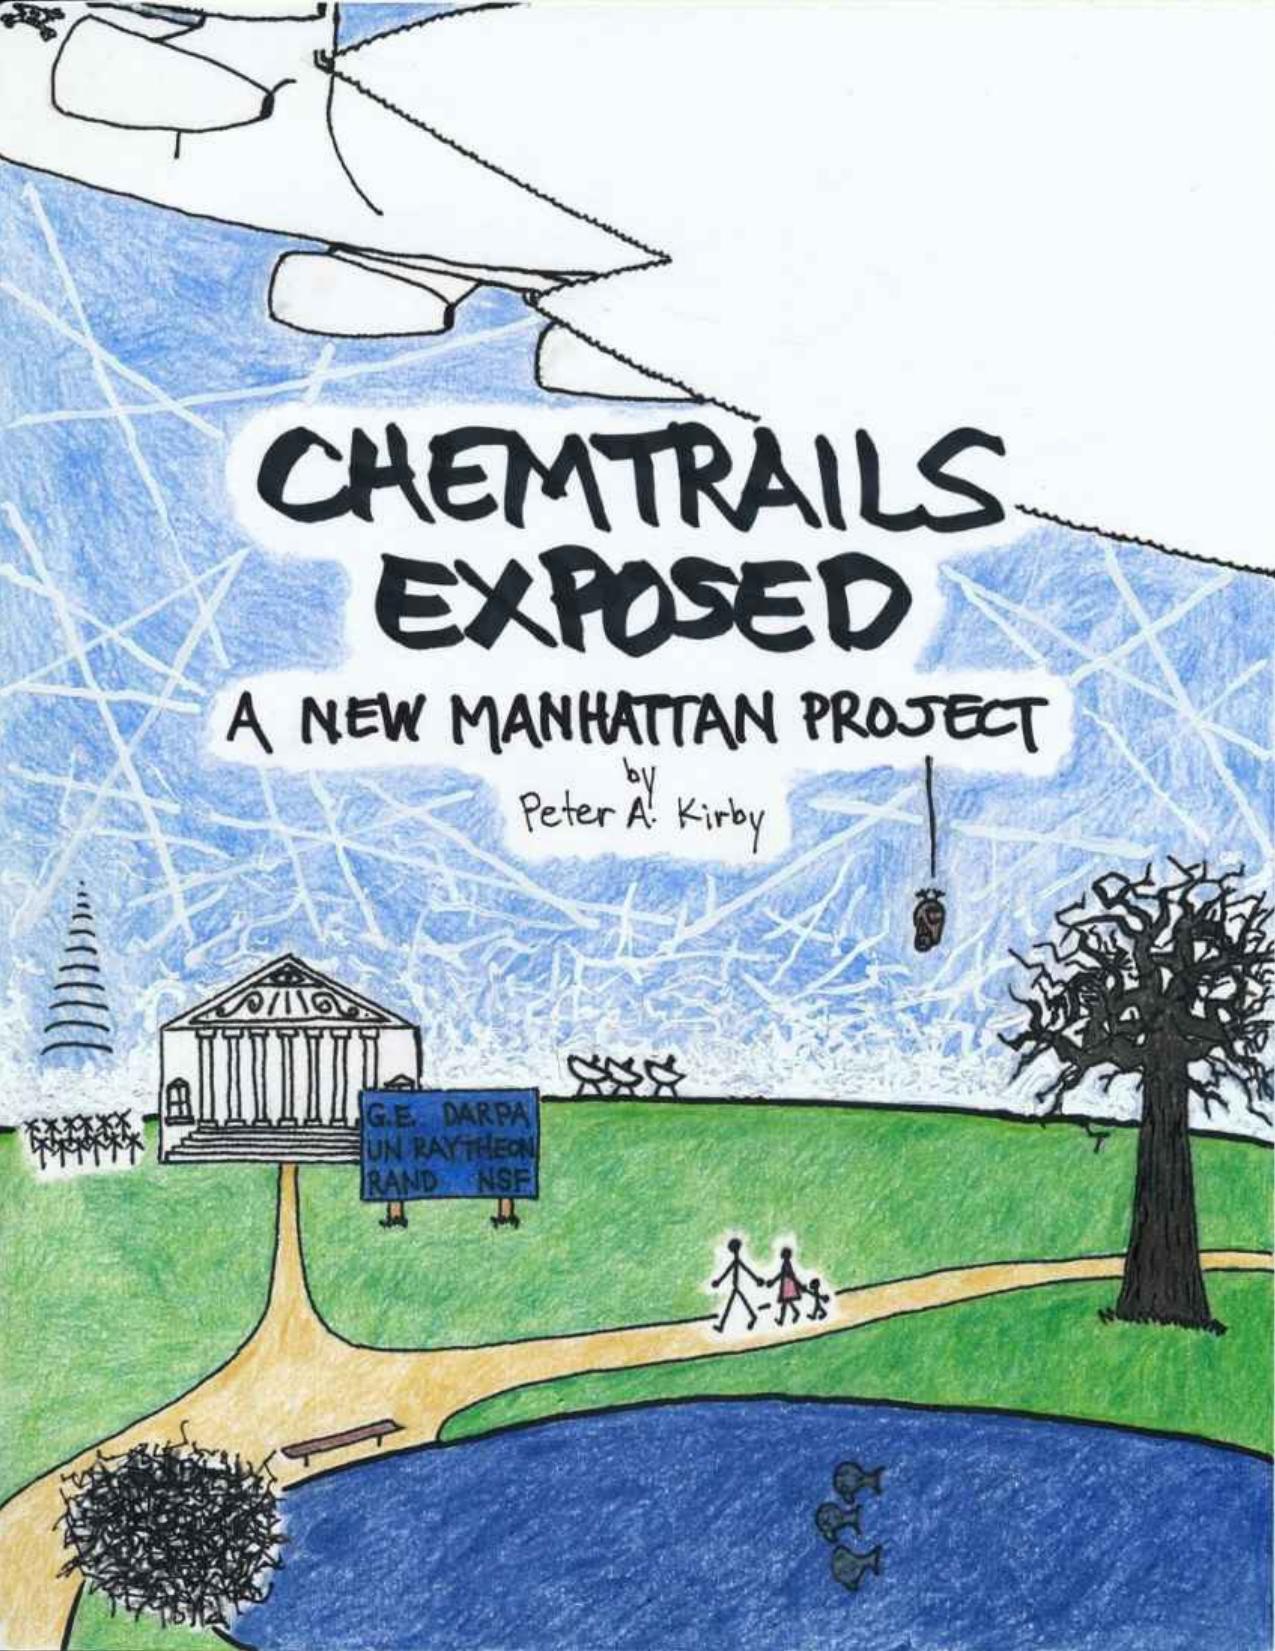 Chemtrails Exposed: A New Manhattan Project by Peter A. Kirby